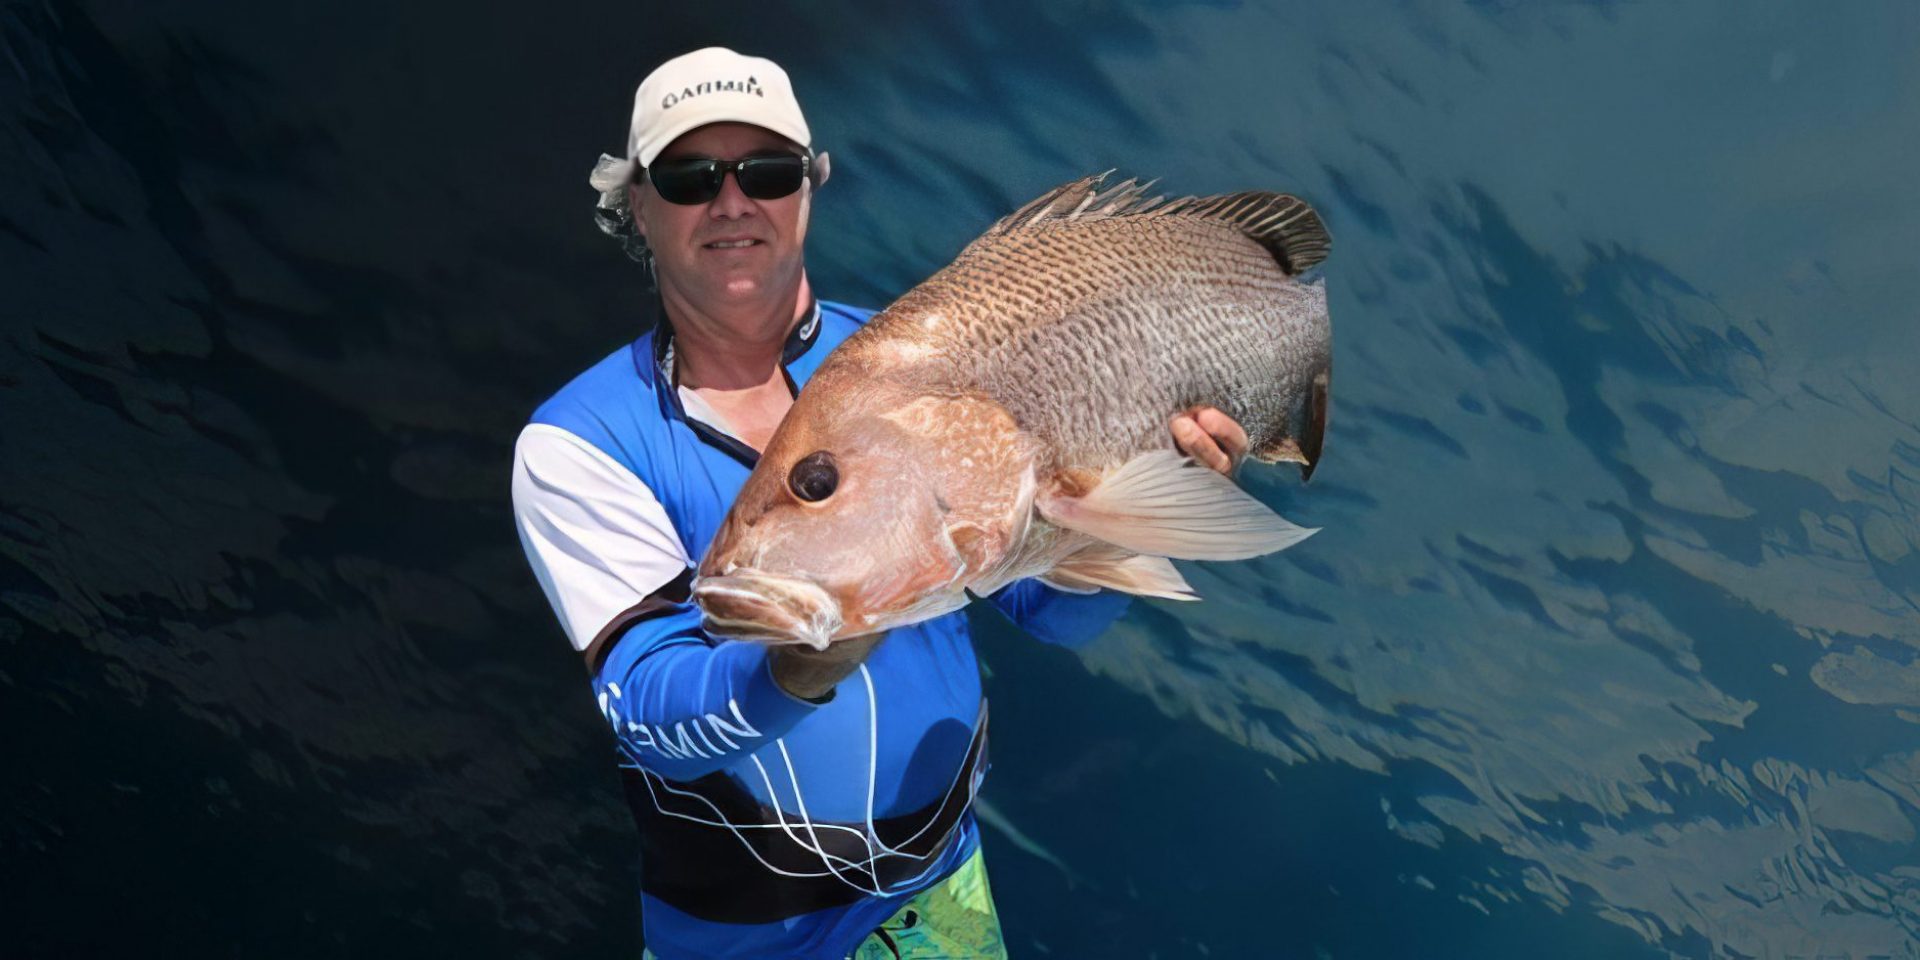 catching-and-rigging-live-squid-to-catch-fingermark-golden-snapper